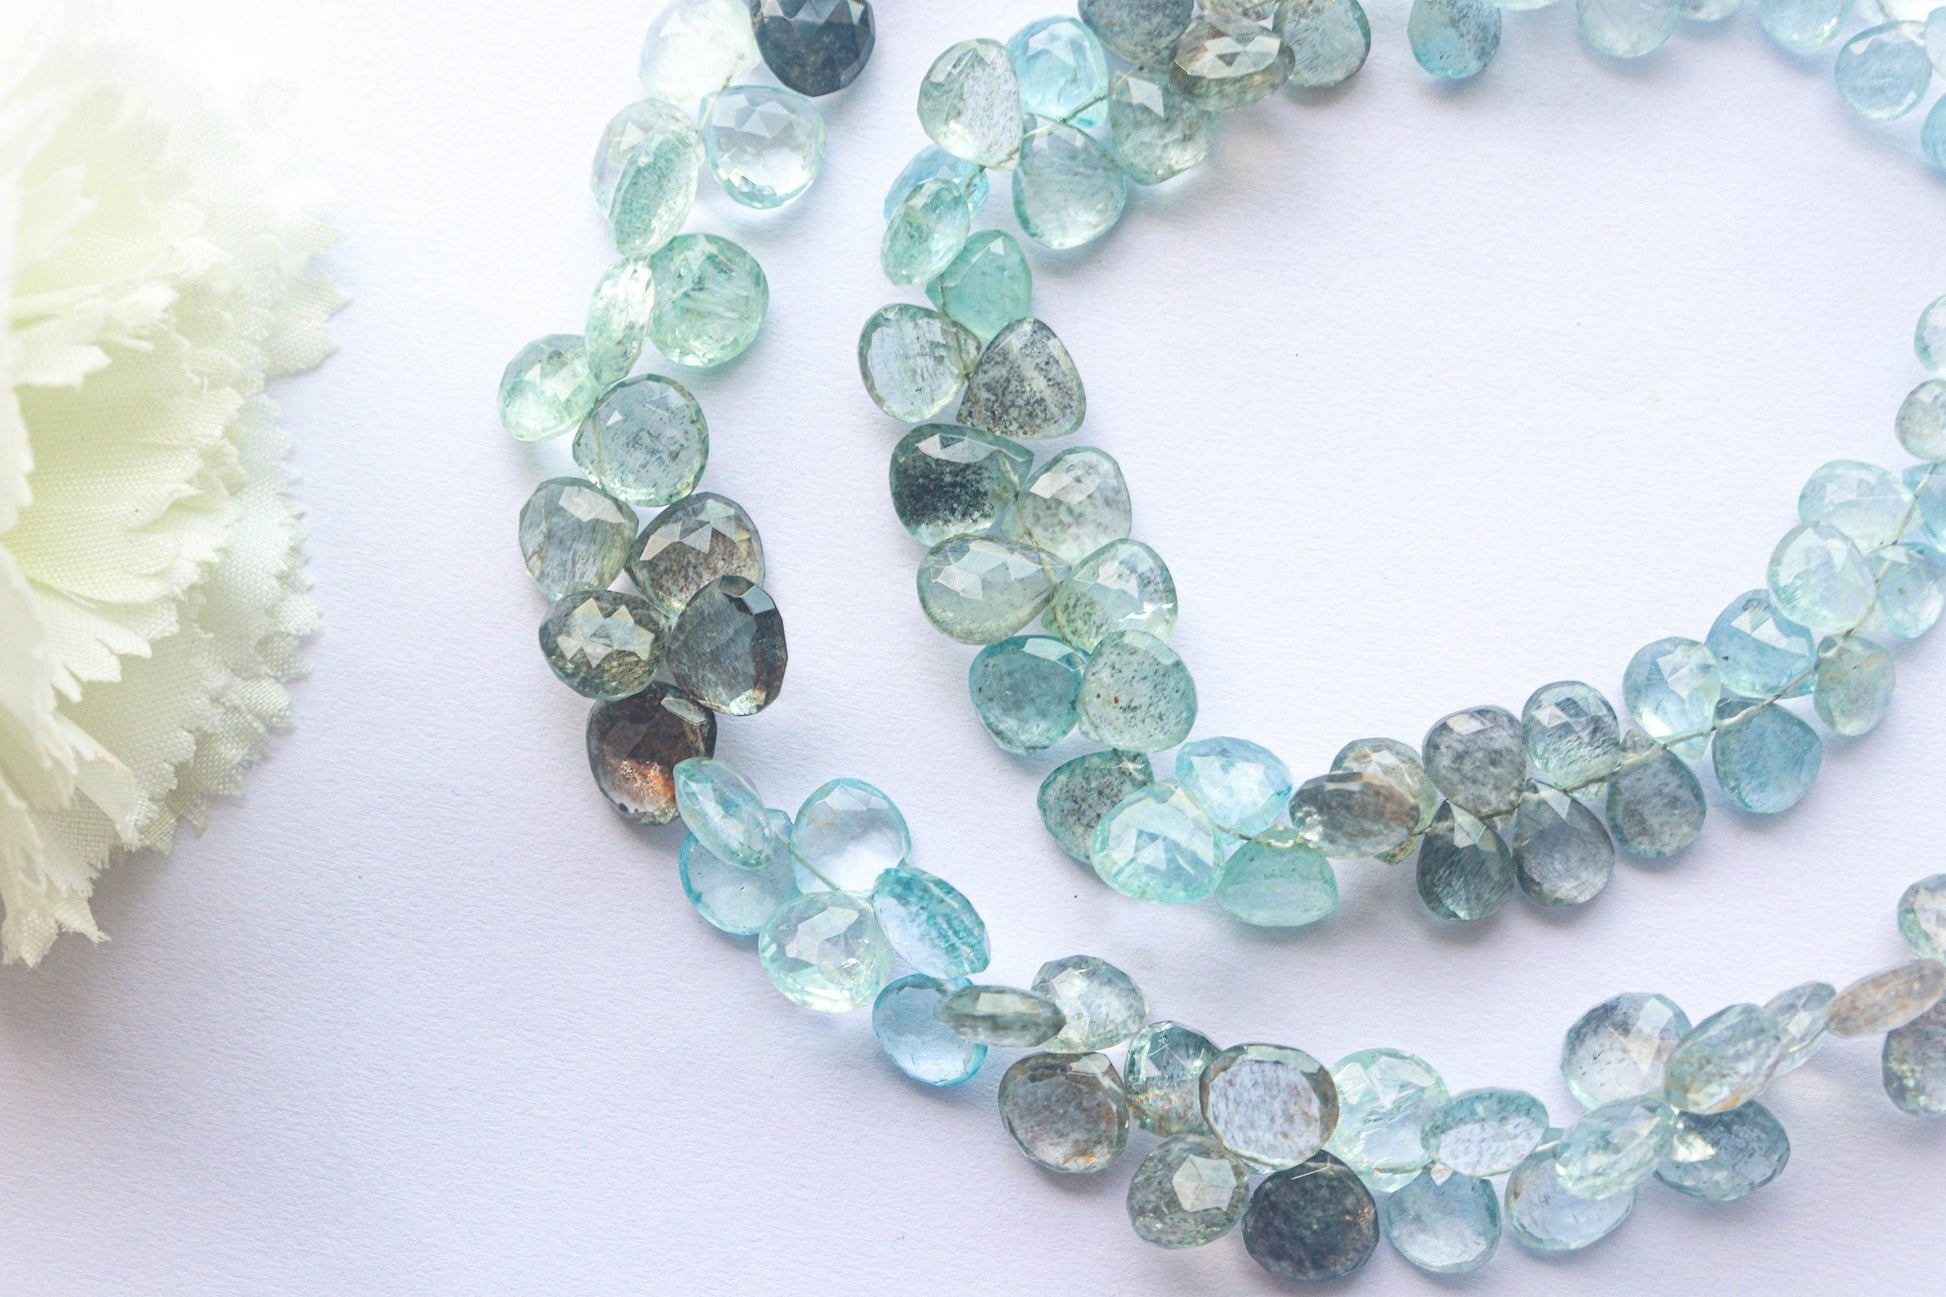 Moss Aquamarine Faceted Heart Shape Briolette | 10x10mm | 51 Pieces Full Strand | 9 Inch | Natural Moss Aquamarine | Beadsforyourjewellery Beadsforyourjewelry